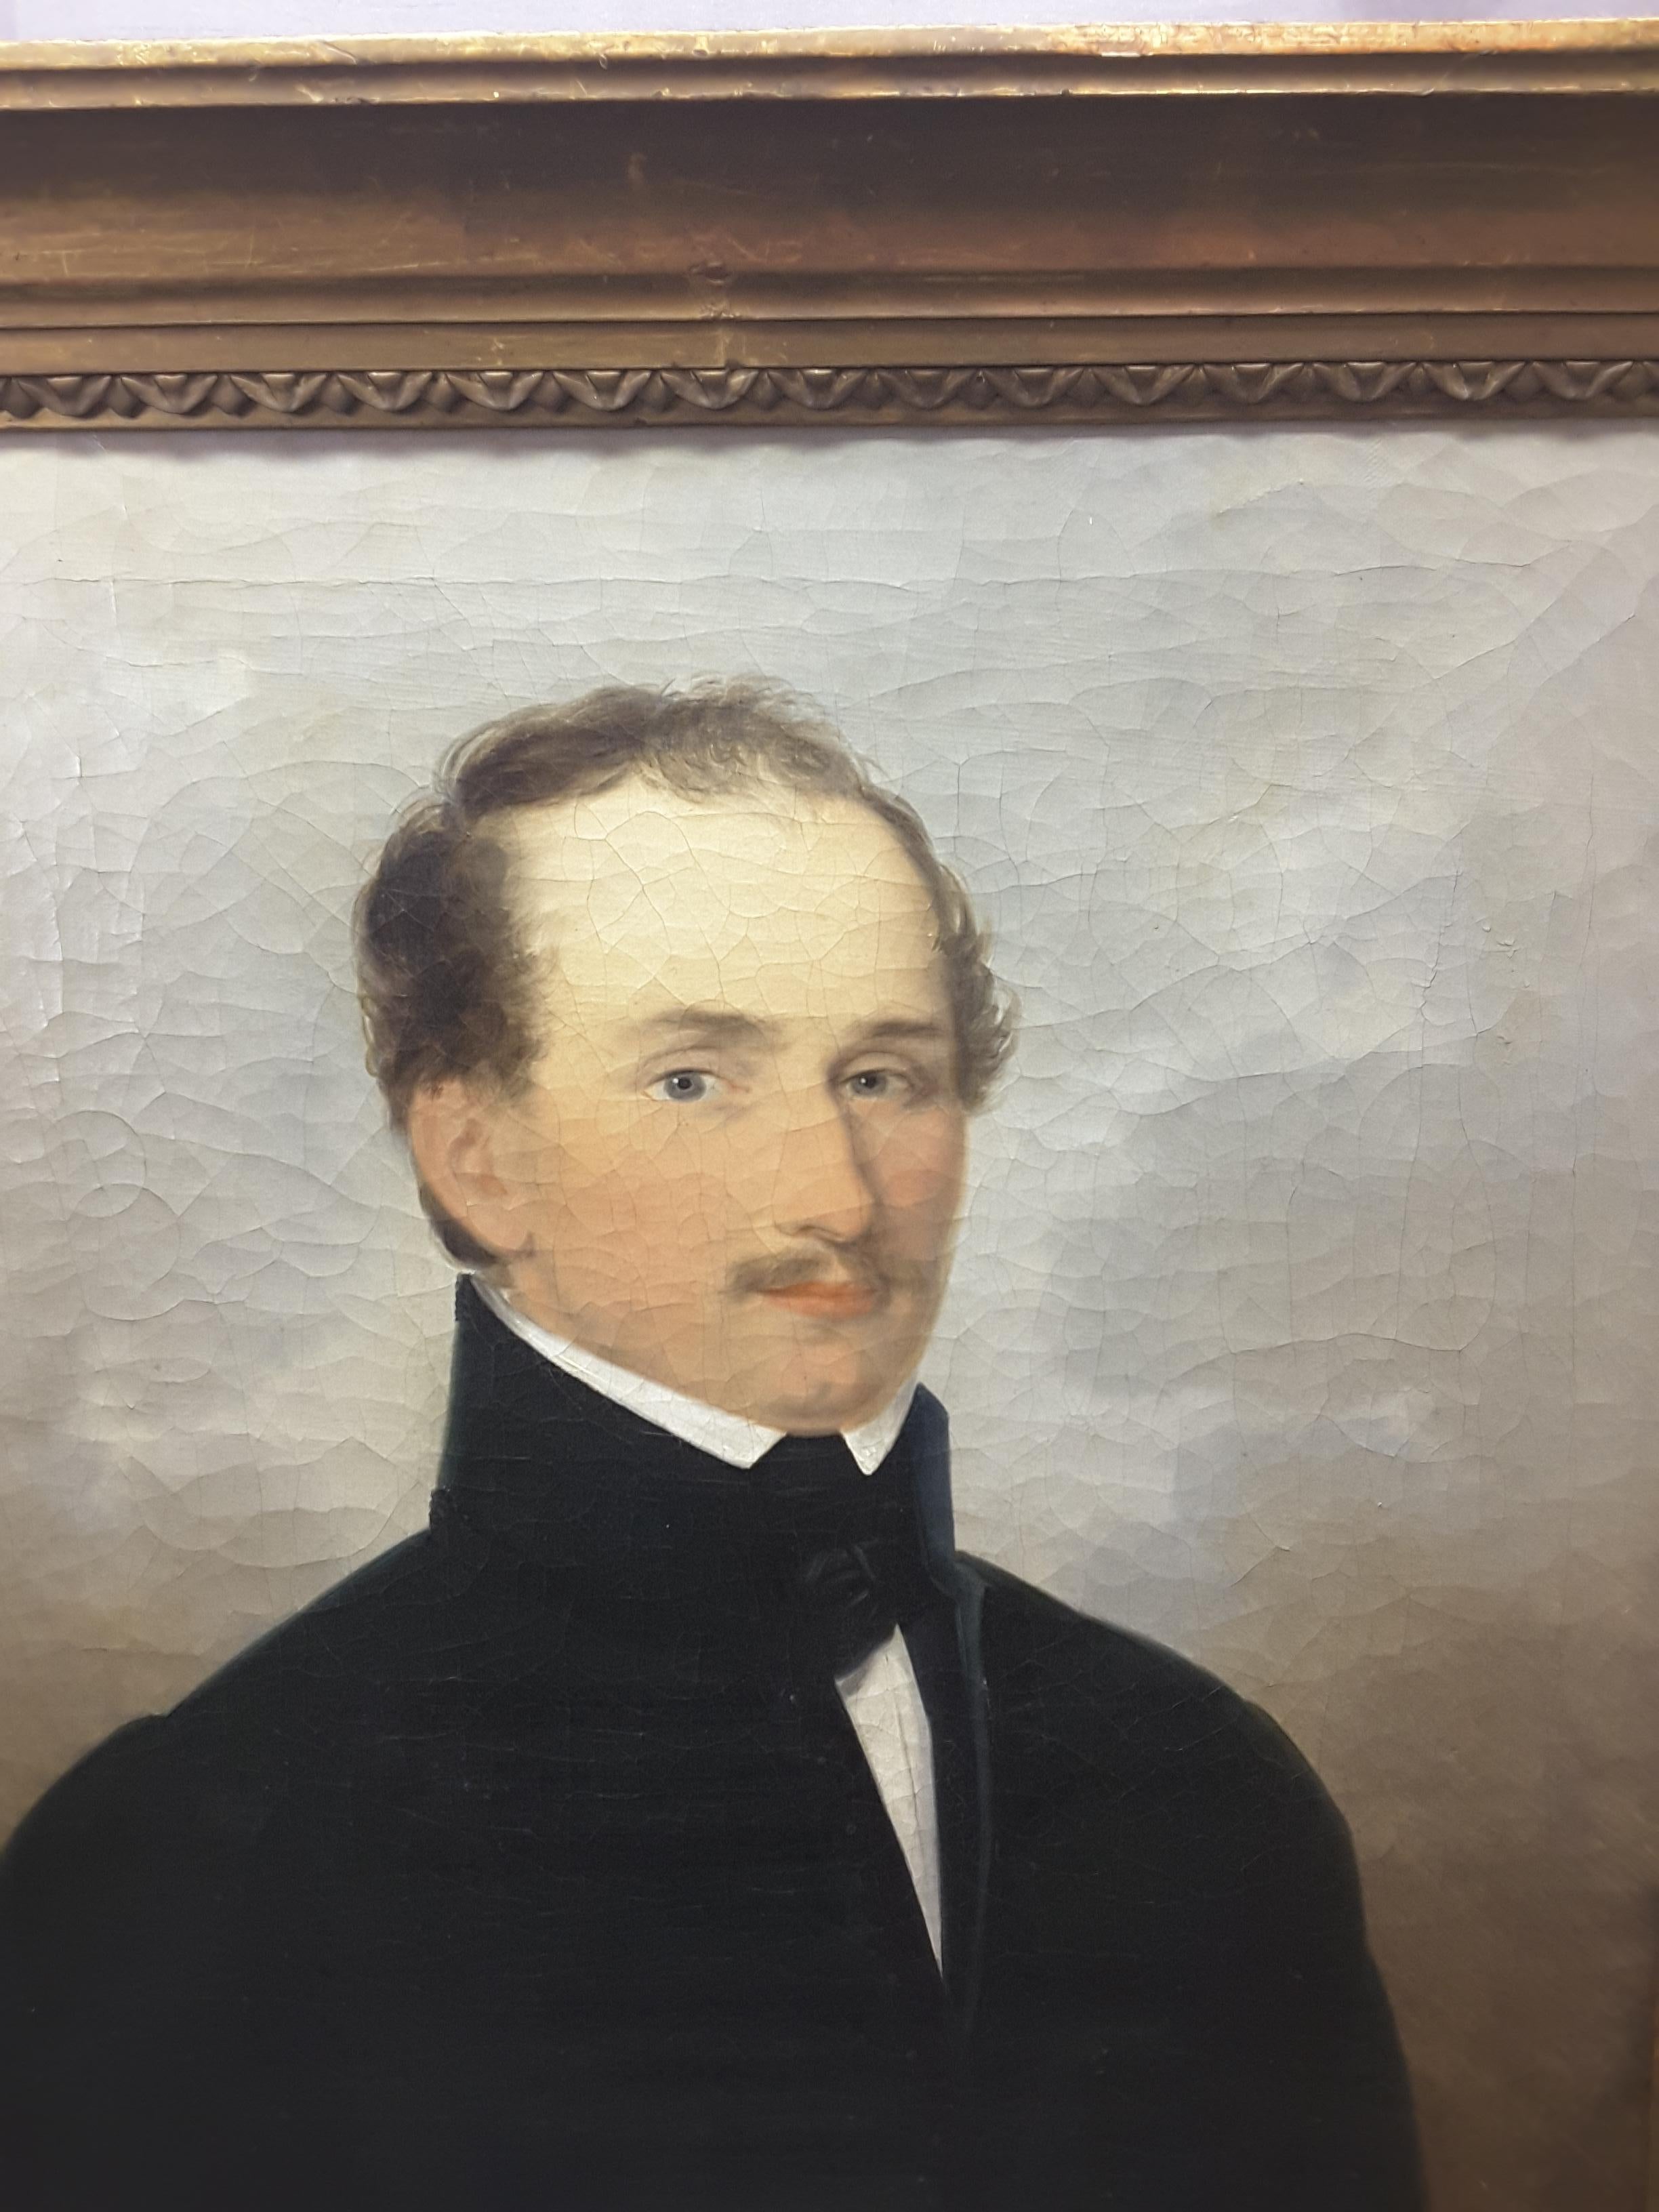 An English 19th century portrait of a gentleman, oil on canvas, original frame and stretcher, crackle paint typical of older paintings of this vintage. There is the remnants of an old gallery label only partial visible due to peeling, also has a